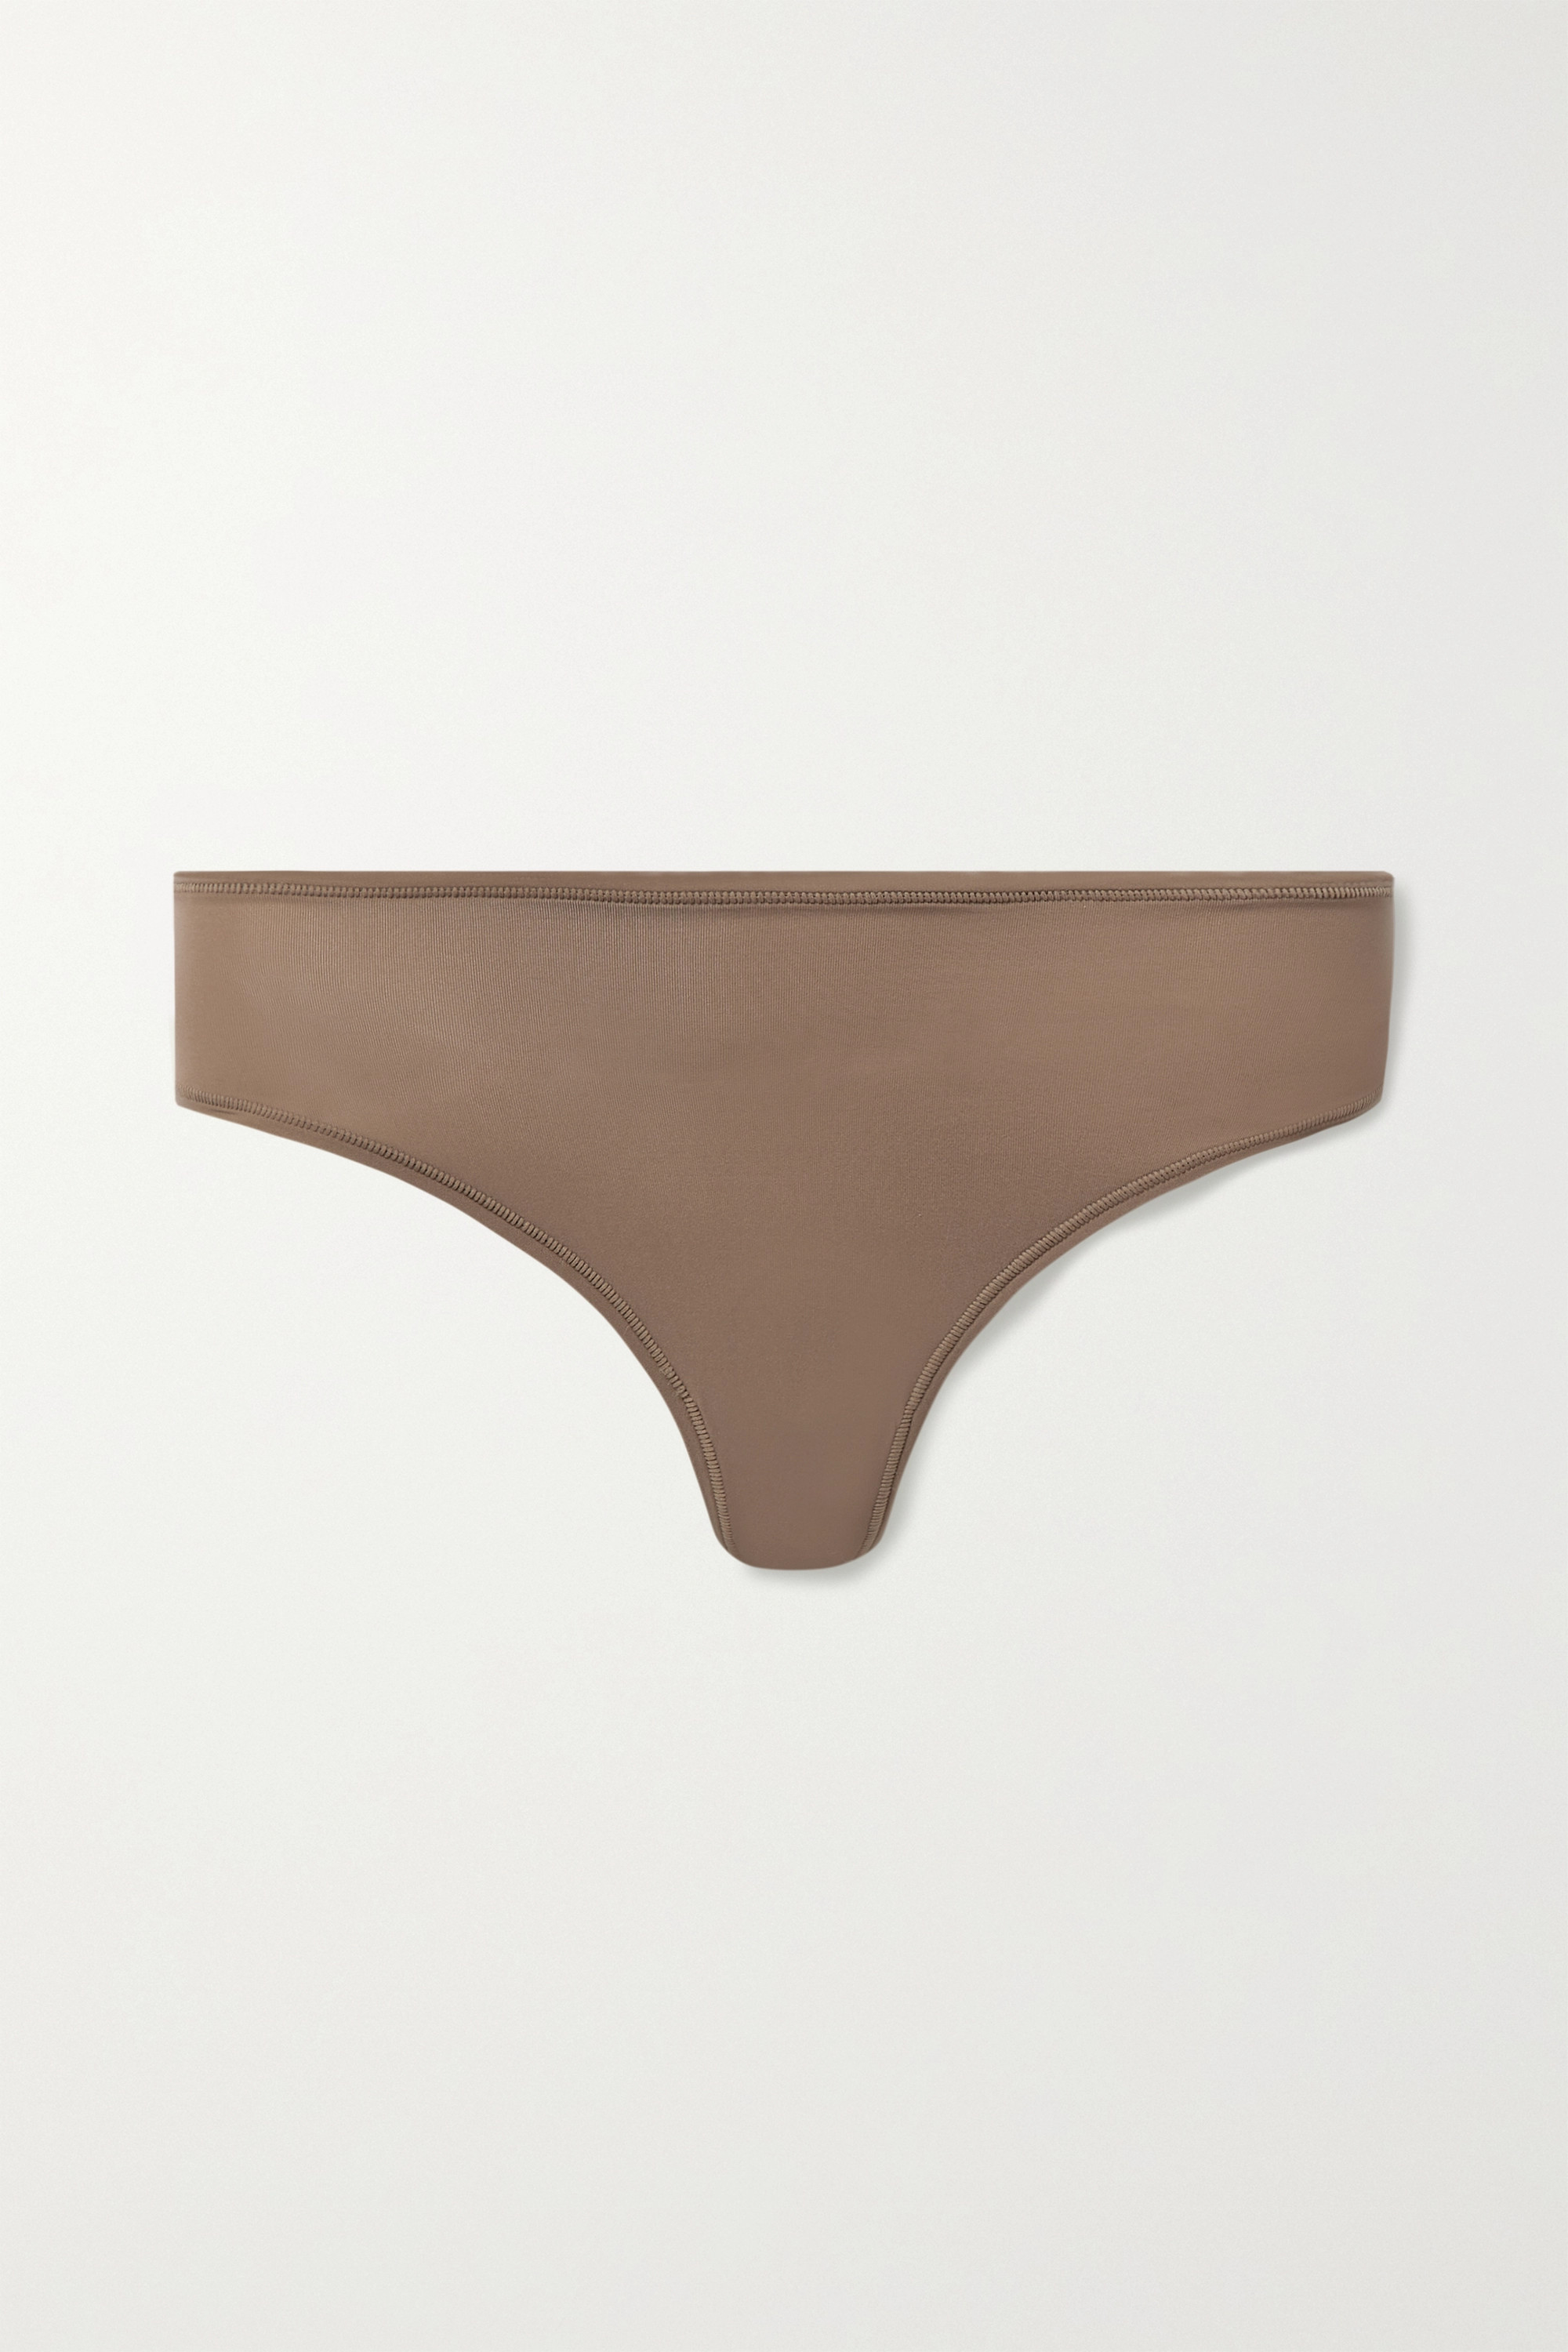 SKIMS + Fits Everybody Thong in Oxide